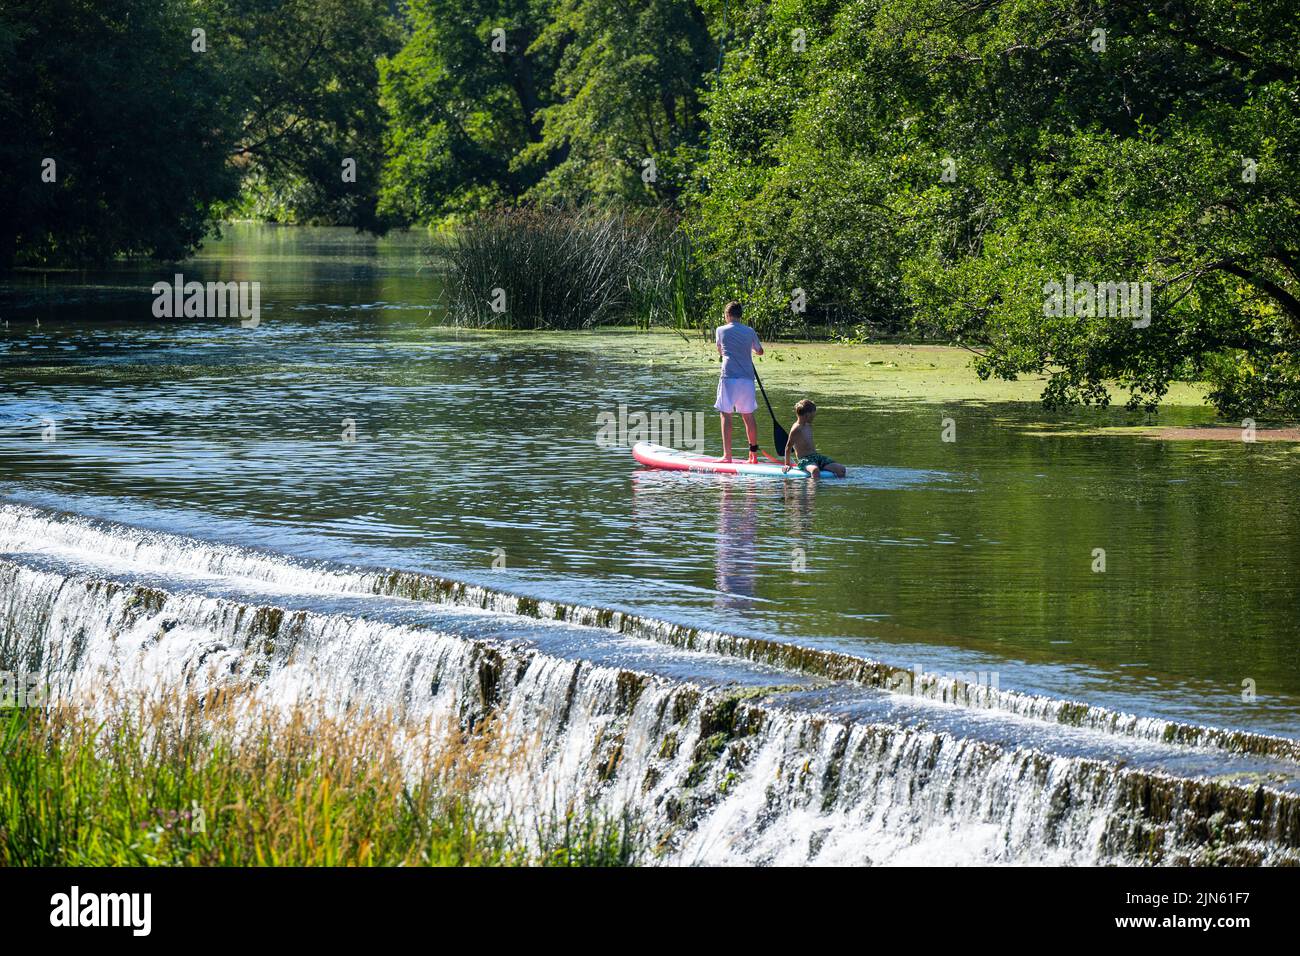 09.08.22. WEATHER SOMERSET.  People enjoy the water at Warleigh Weir on the River Avon near Bath in Somerset as temperatures continue to soar across t Stock Photo